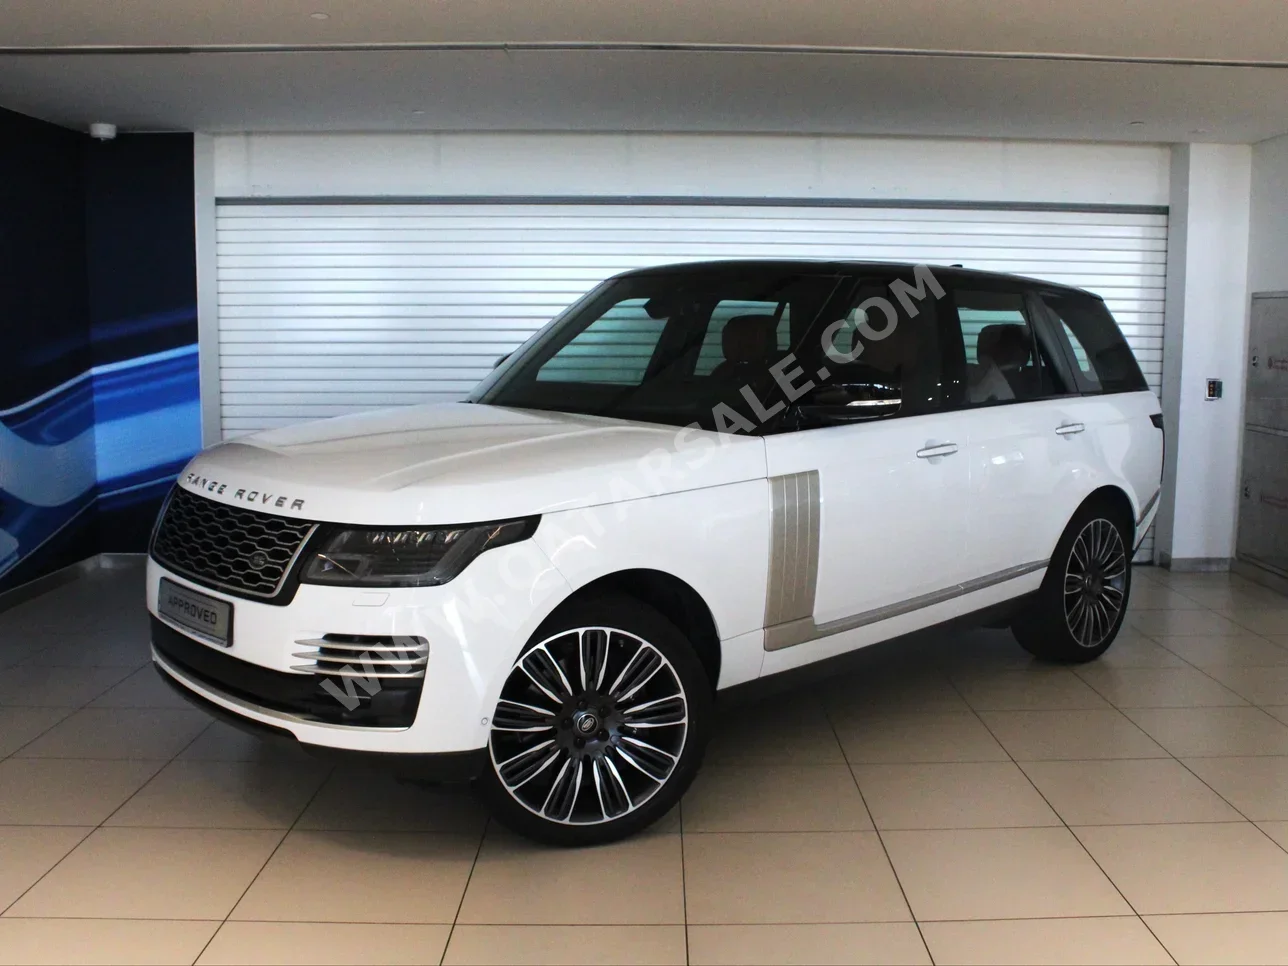 Land Rover  Range Rover  Vogue  Autobiography  2020  Automatic  56,000 Km  8 Cylinder  Four Wheel Drive (4WD)  SUV  White  With Warranty